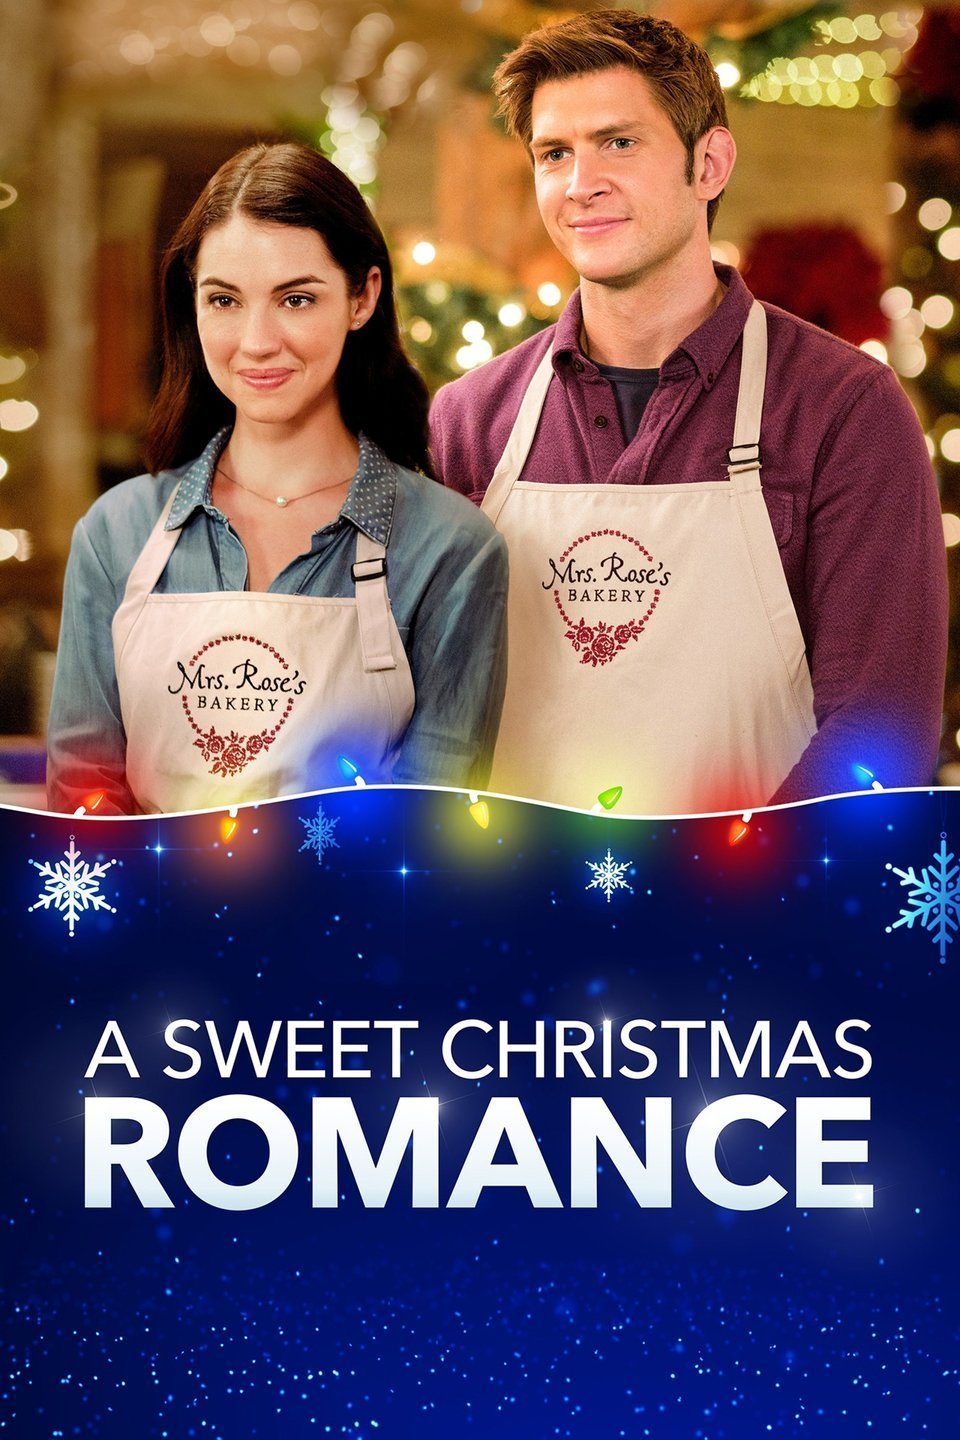 Poster of the movie A Sweet Christmas Romance